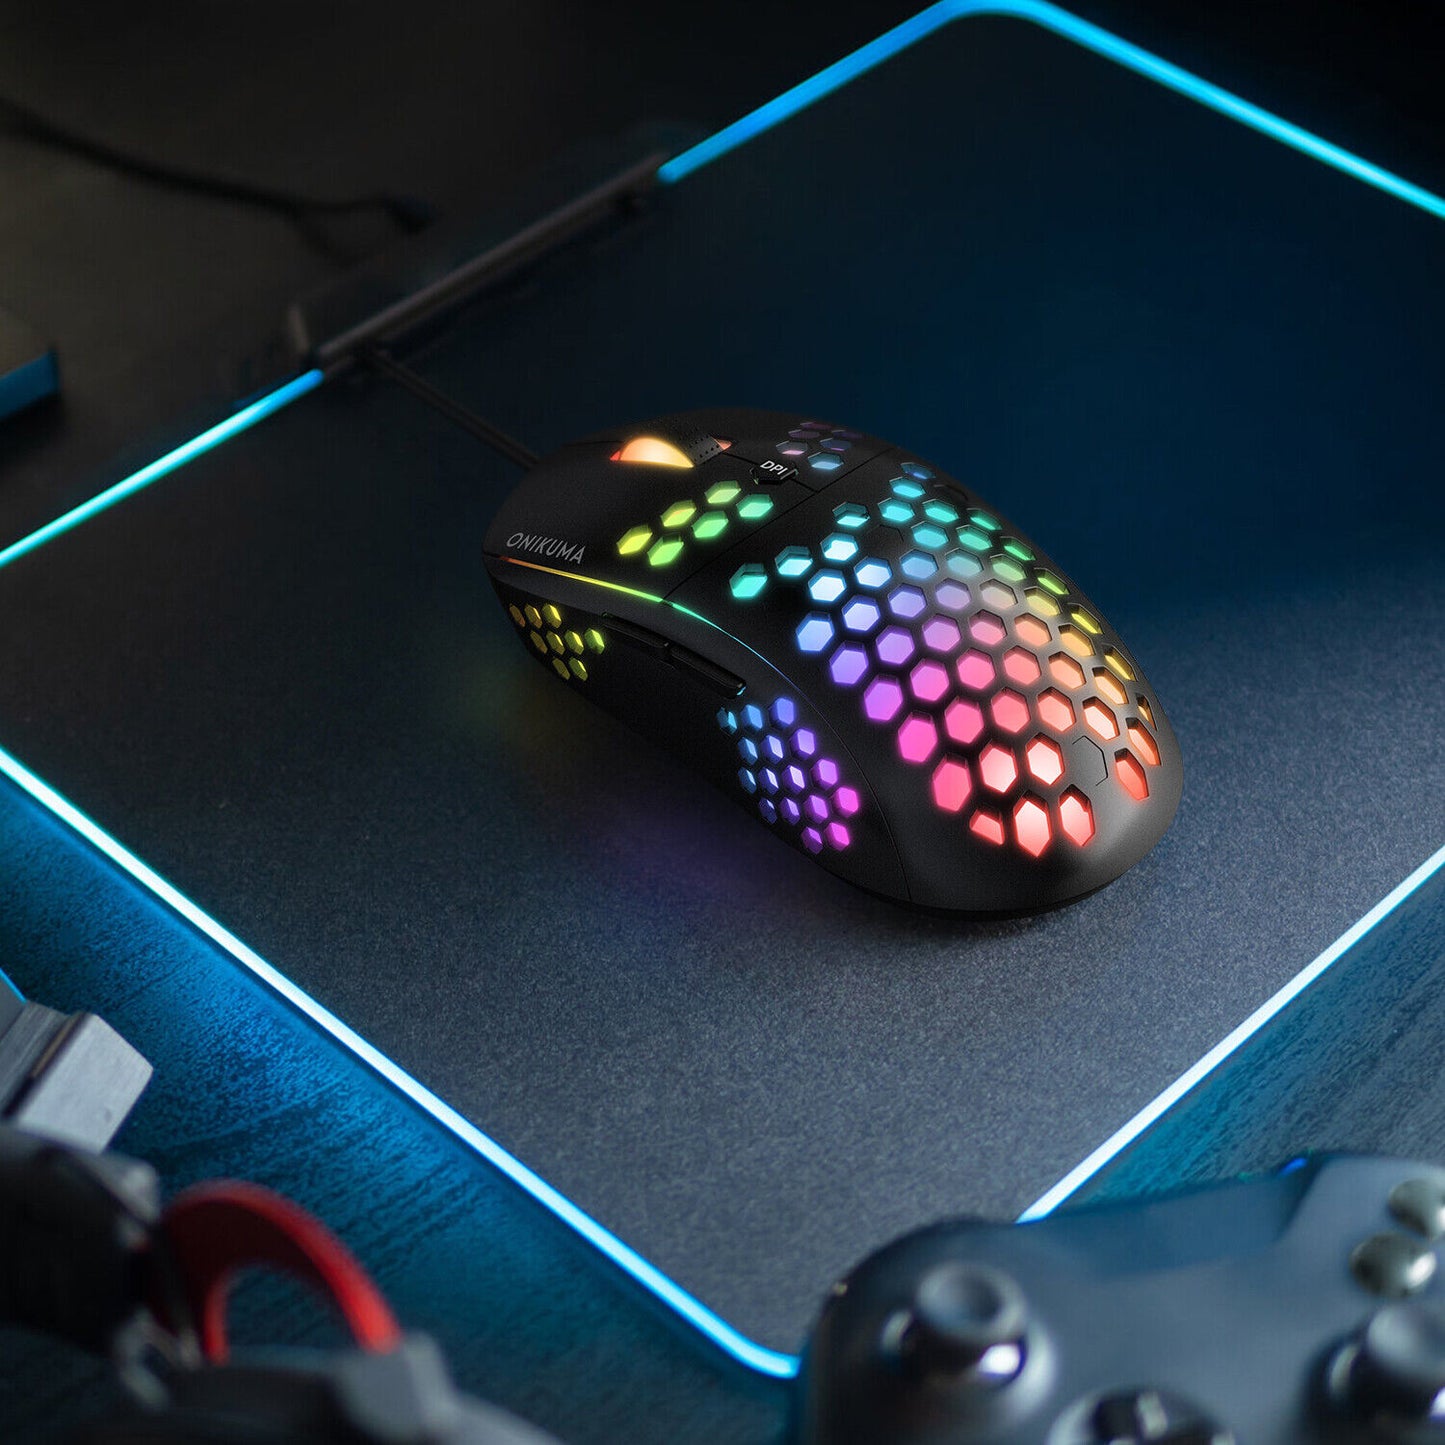 CW903 RGB Six-Speed Adjustable honeycomb Non-Slip Wired Gaming Mouse